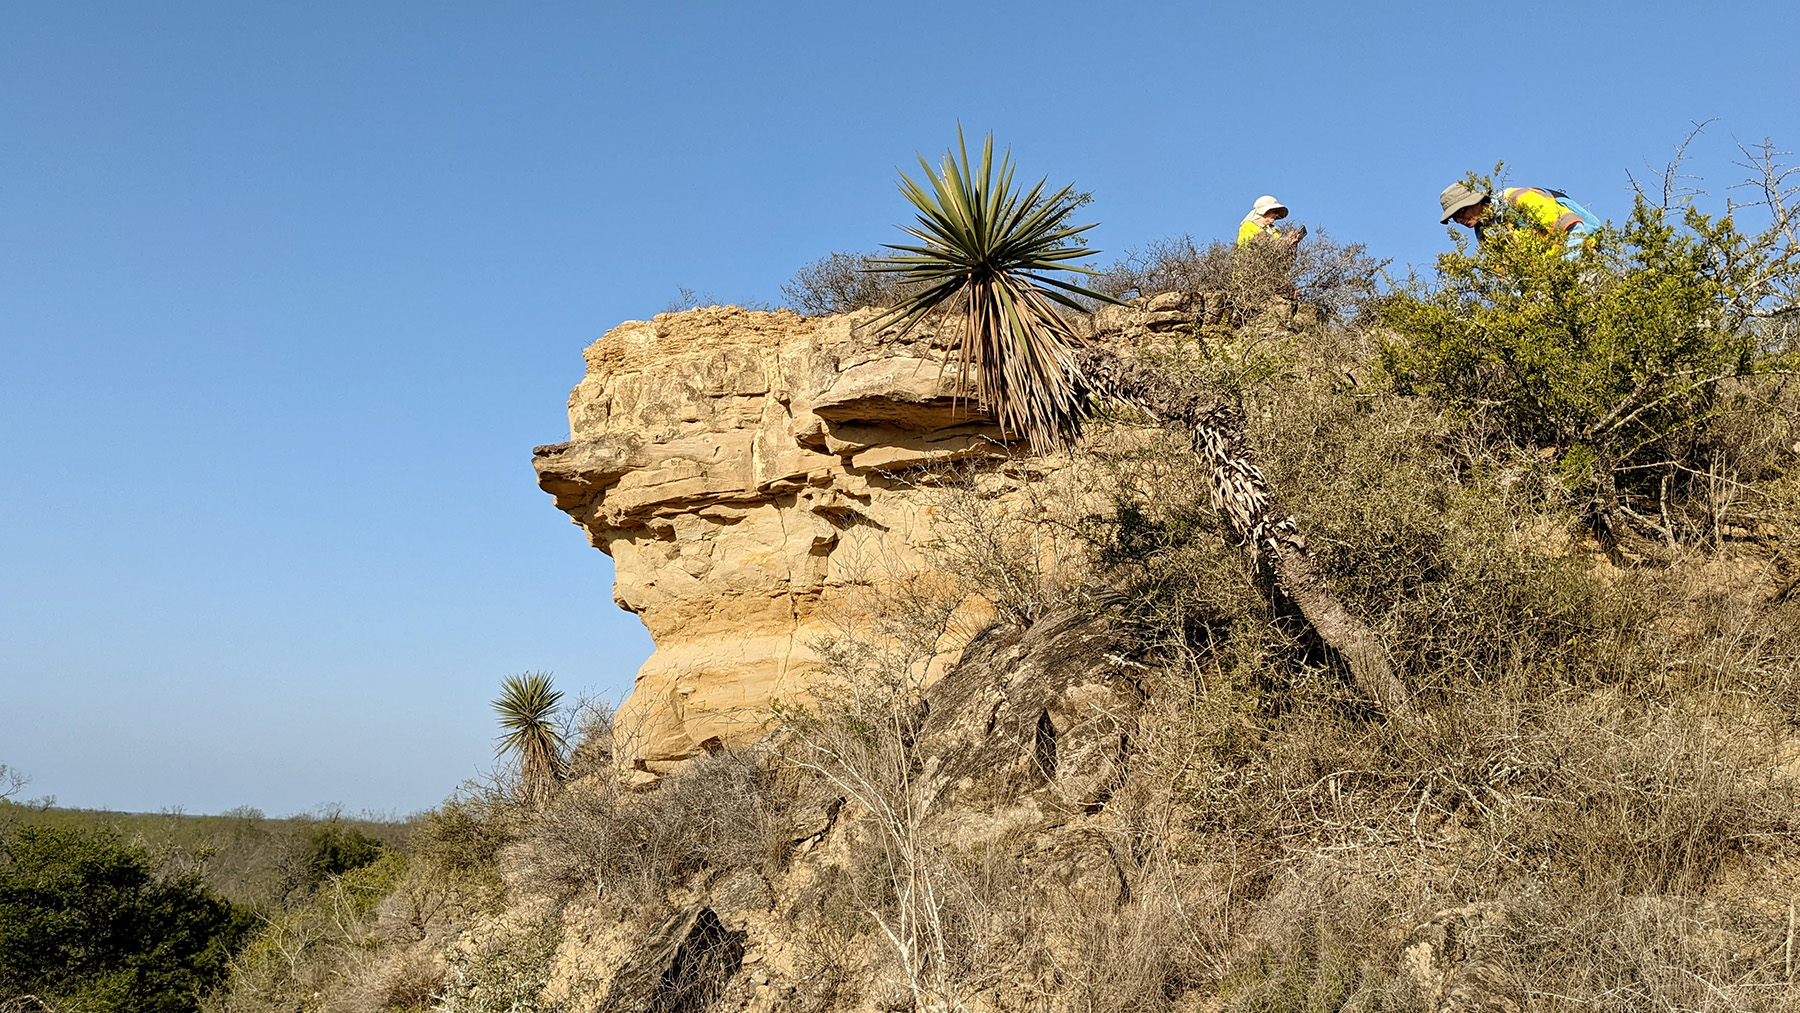 A view of the thornscrub habitat along the bluffs of the Rio Grande. Credit: Photo by Sara Johnson